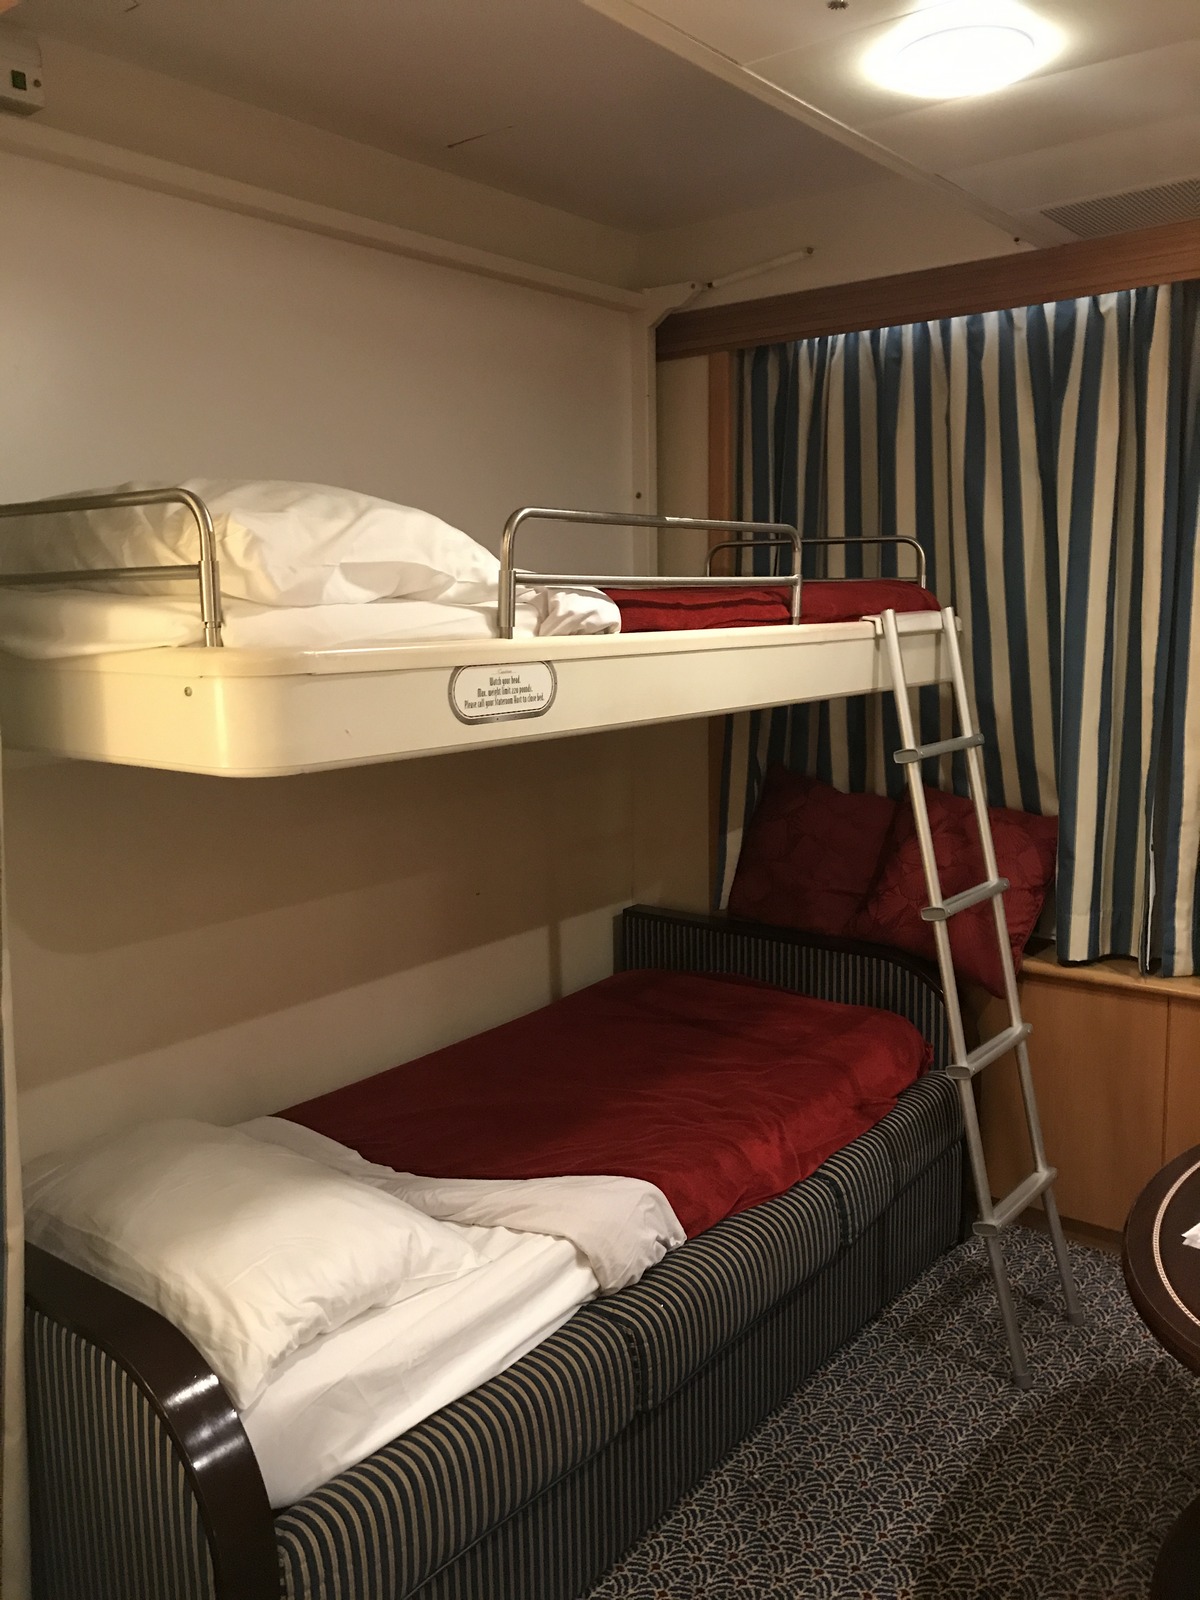 Disney Magic Cruise Review A Truly, Disney Cruise Bunk Beds